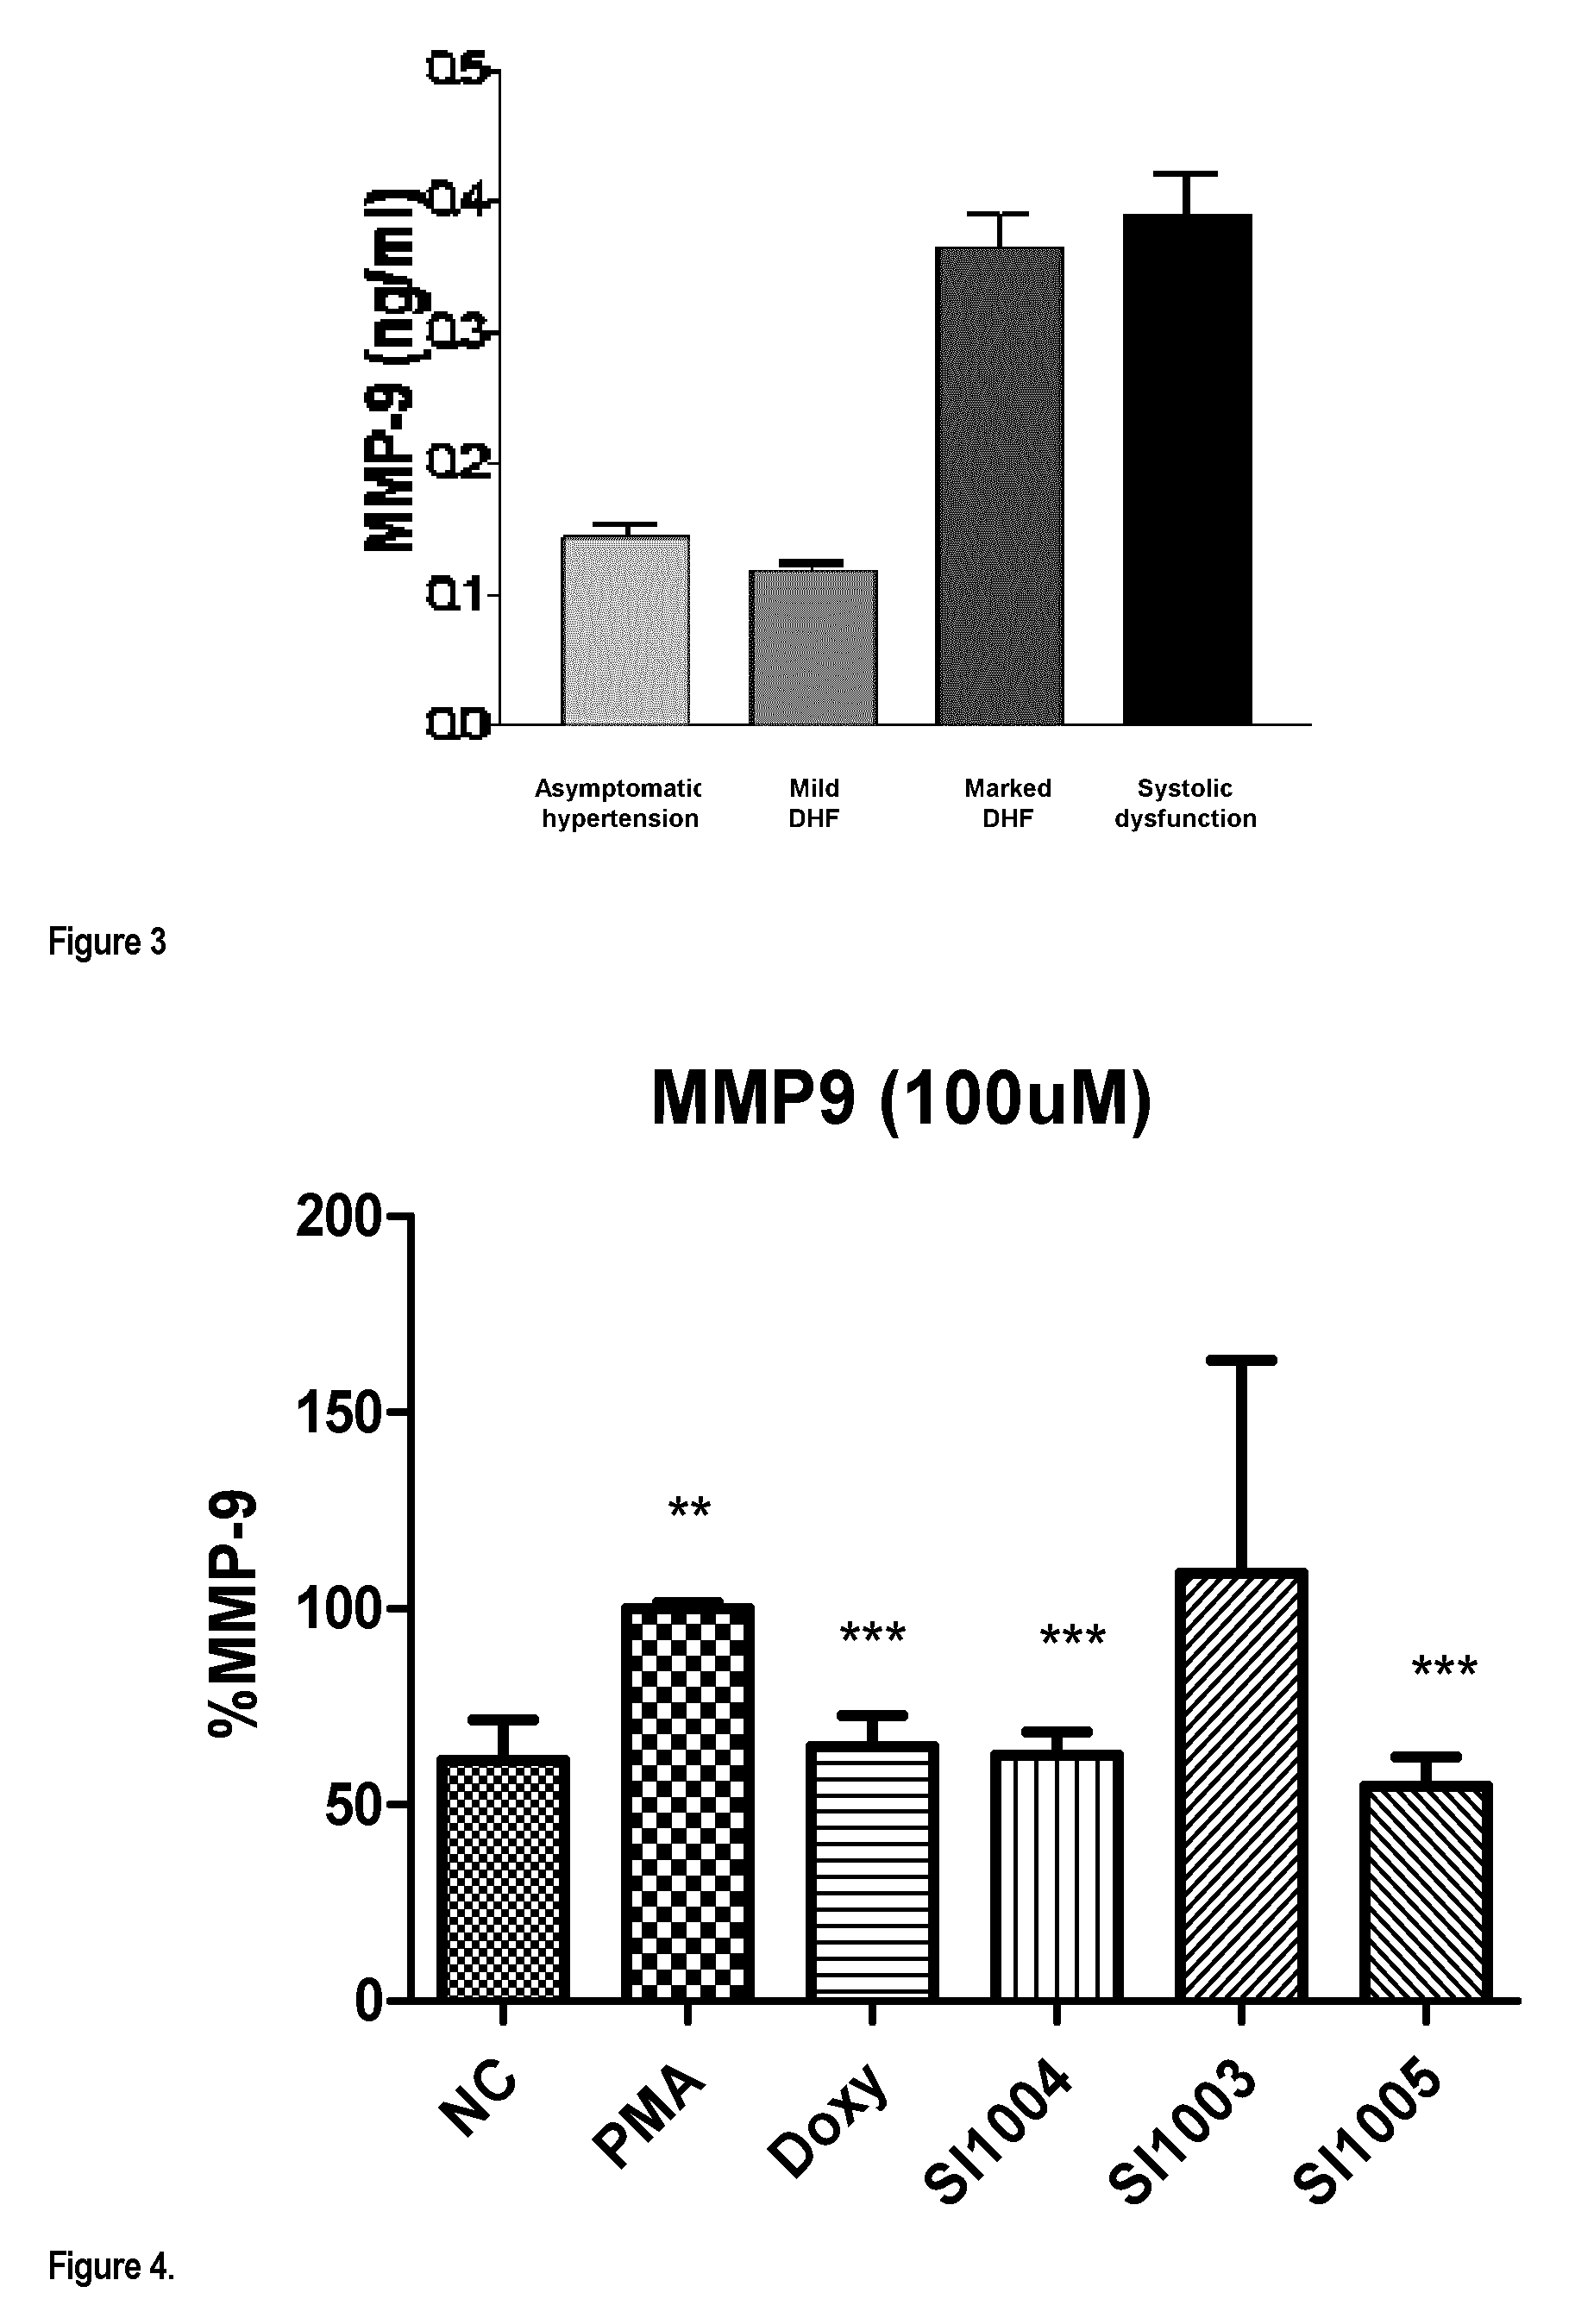 Compounds for treatment of heart failure